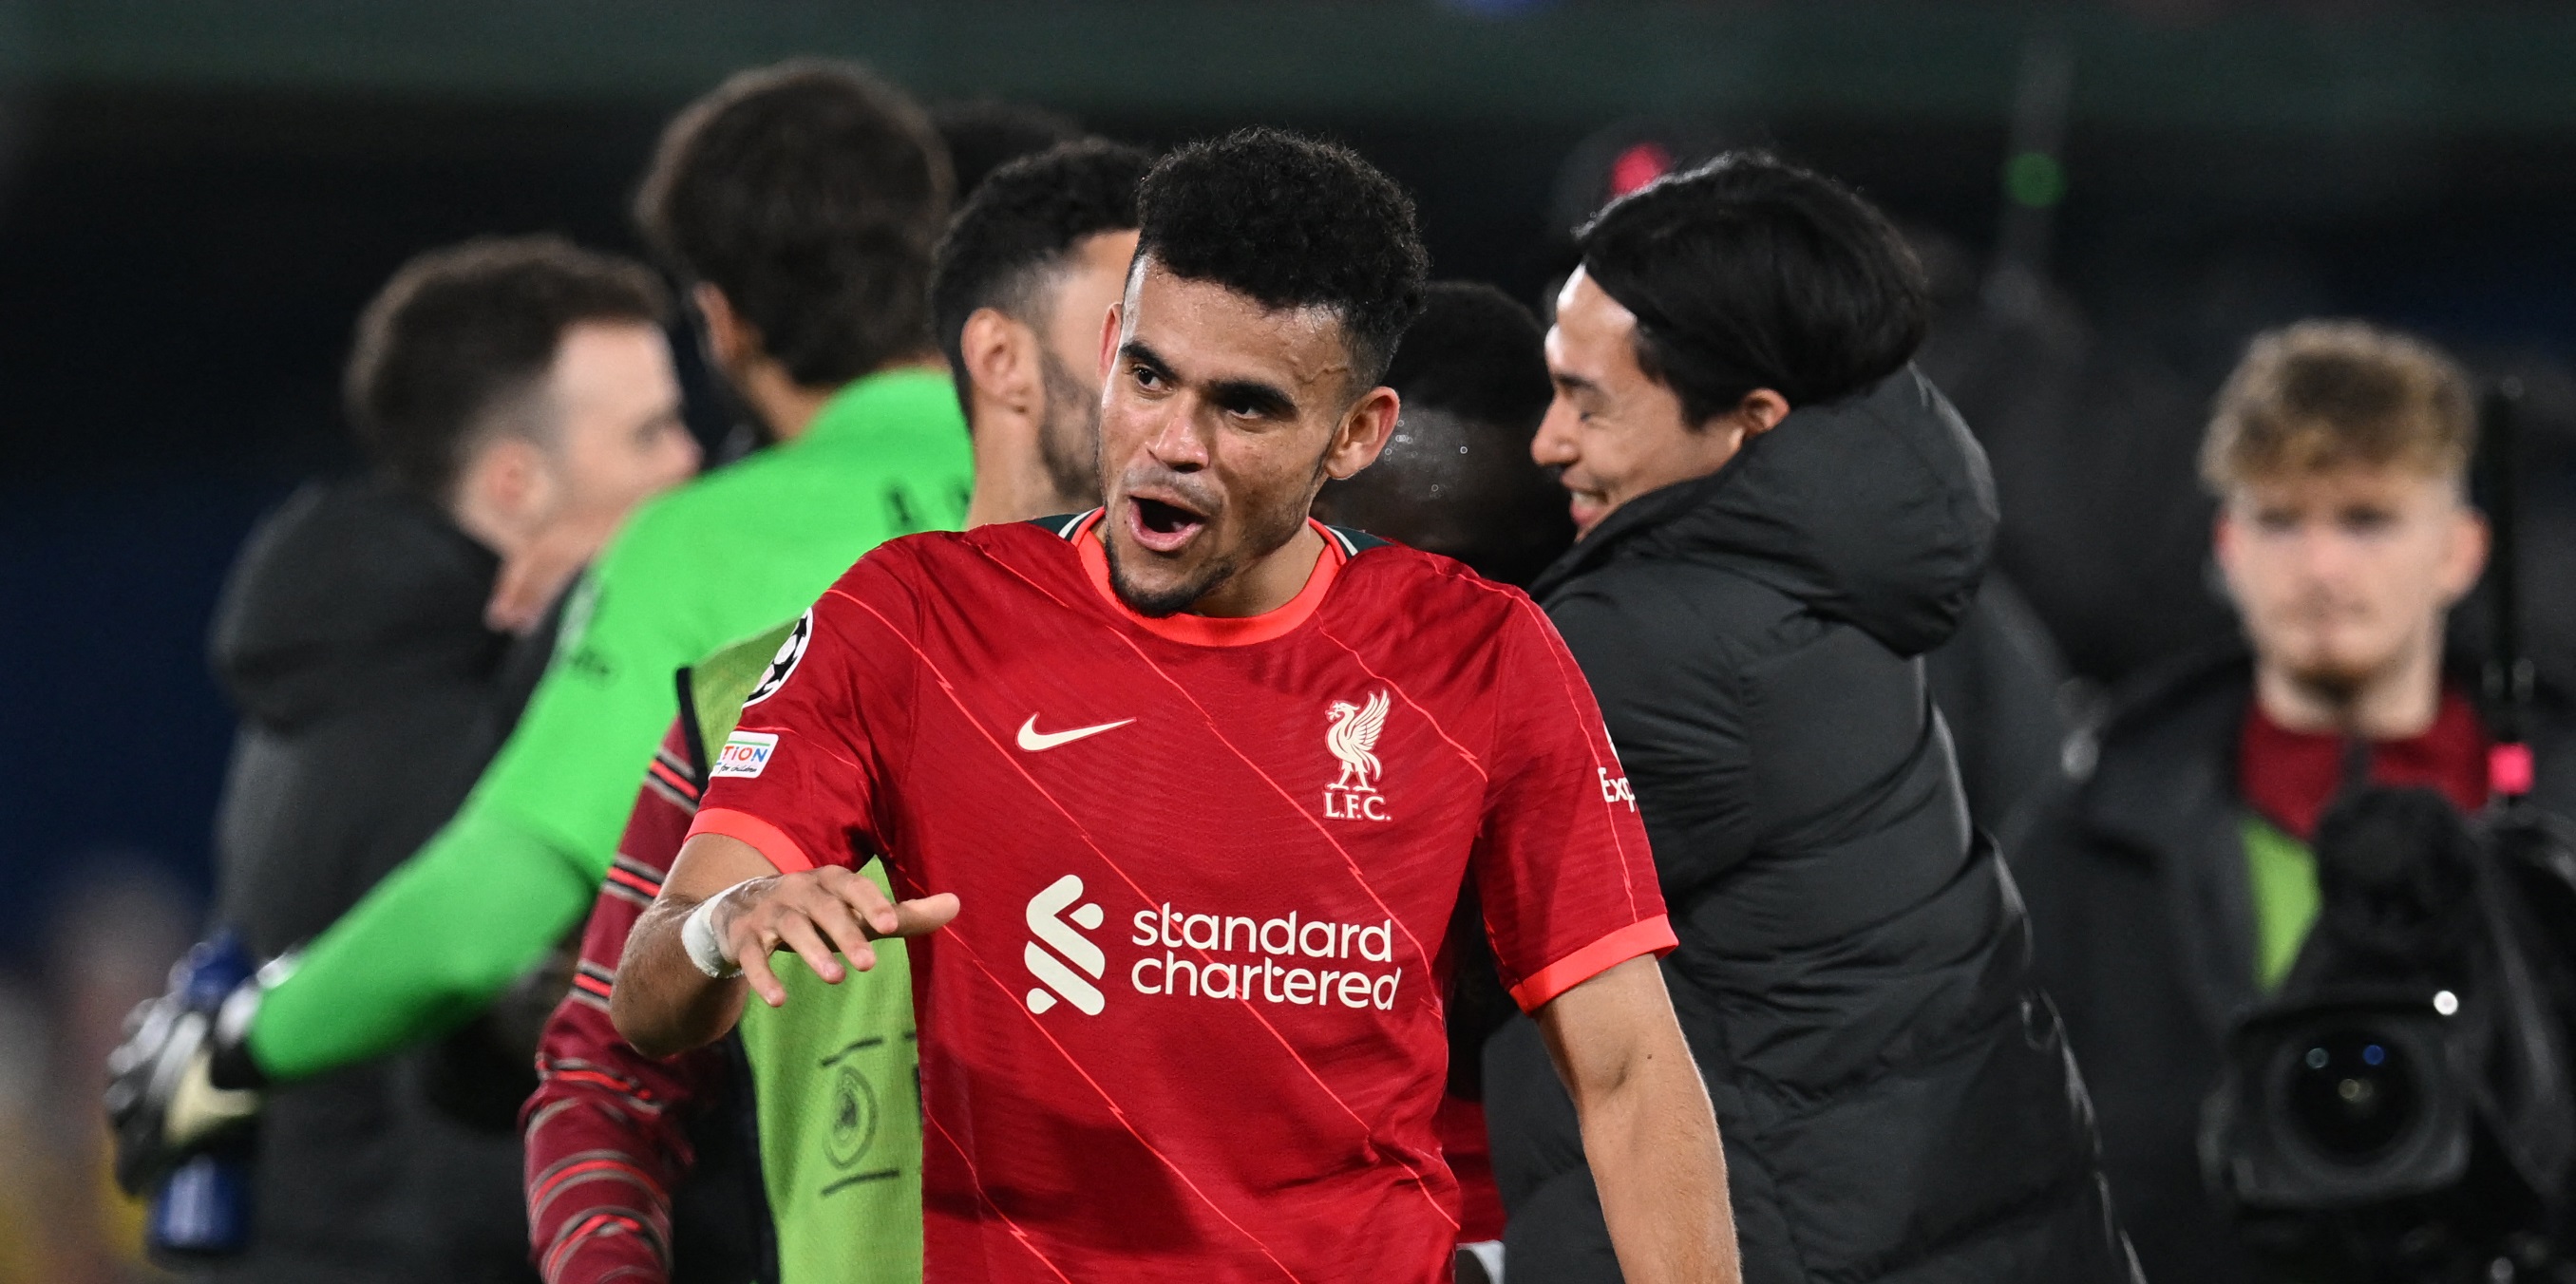 Luis Diaz ‘really close’ with 21-year-old & 19-year-old Liverpool teammates despite having ‘no idea how they talk’, admits Klopp